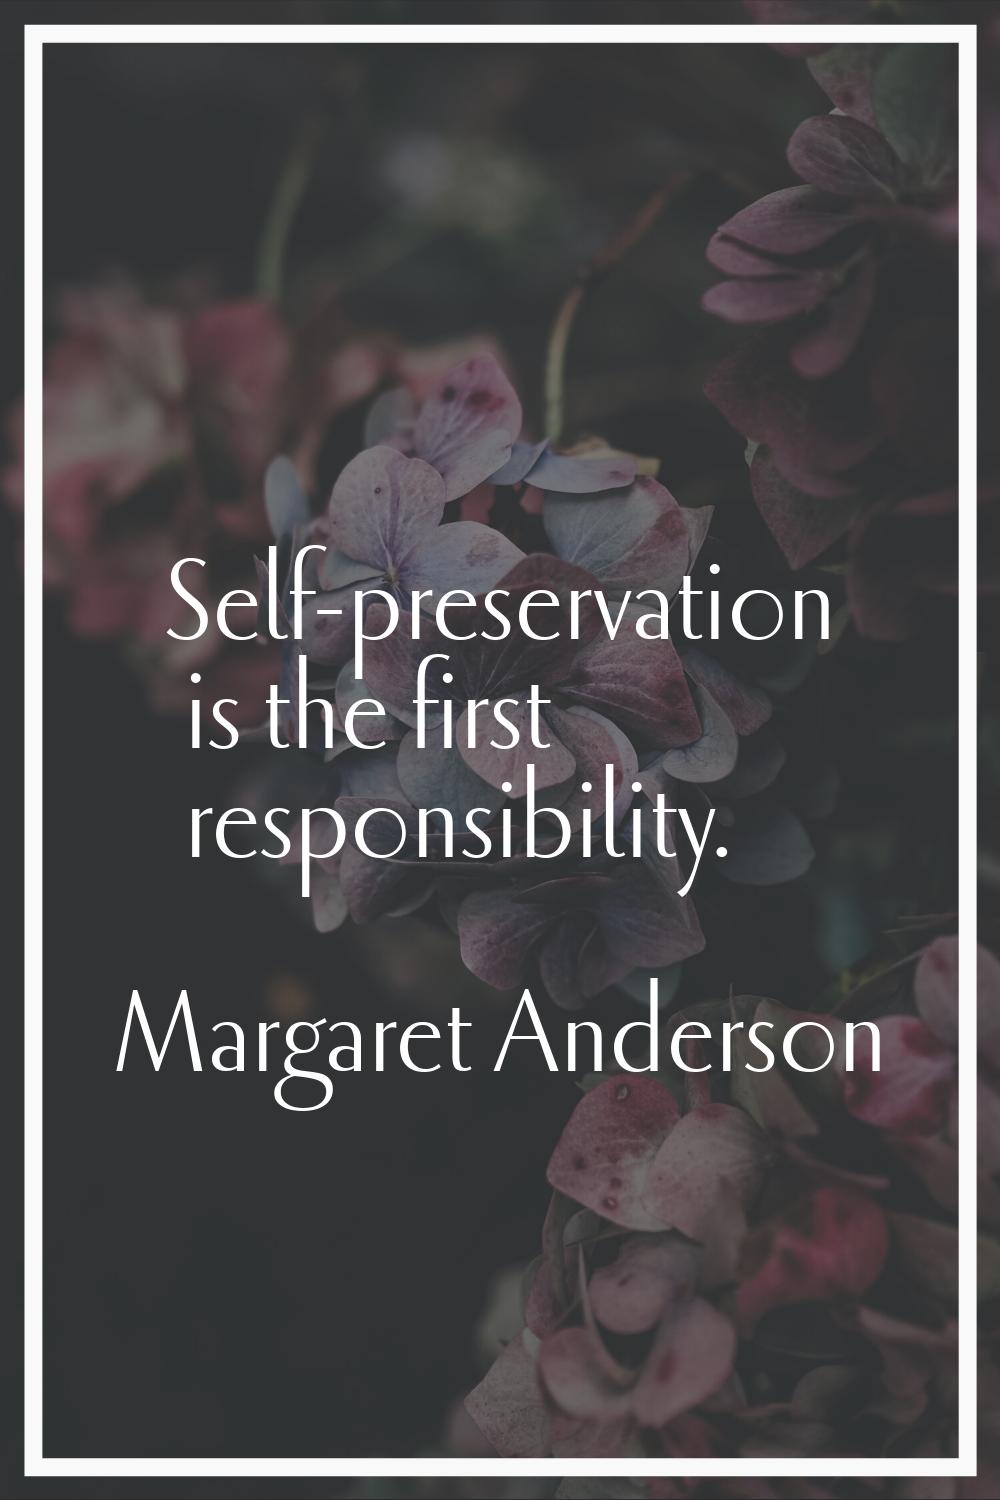 Self-preservation is the first responsibility.